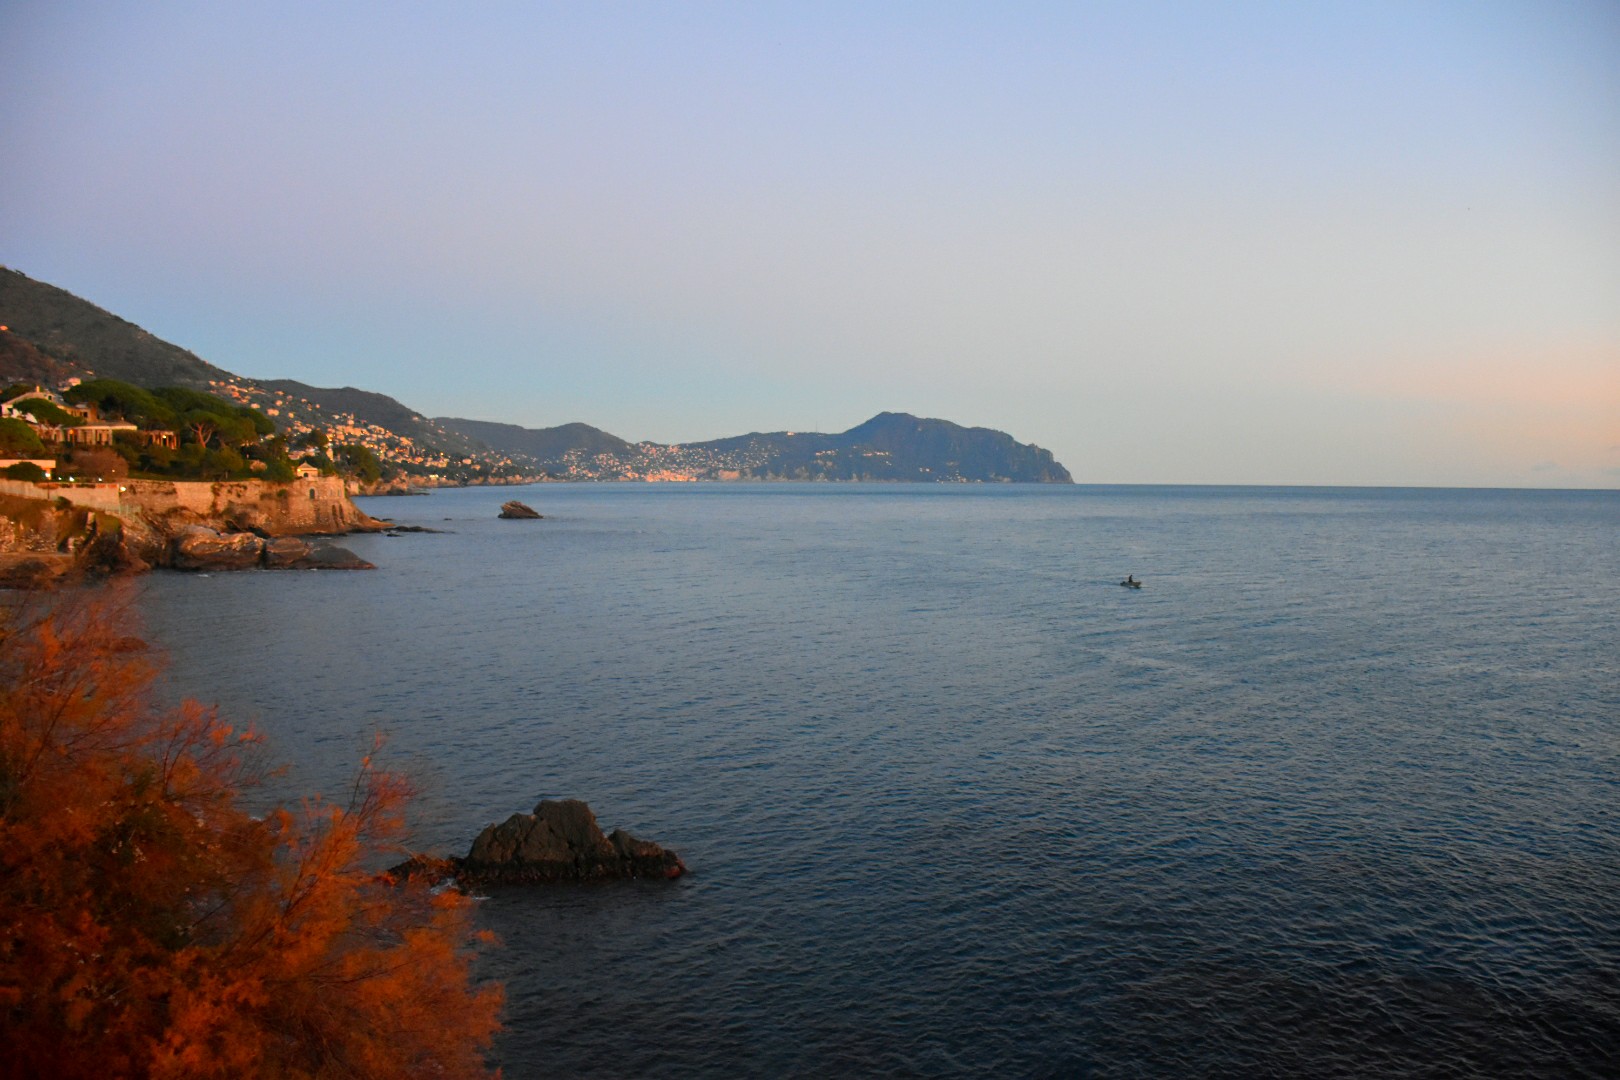 View from the promenade in Nervi...